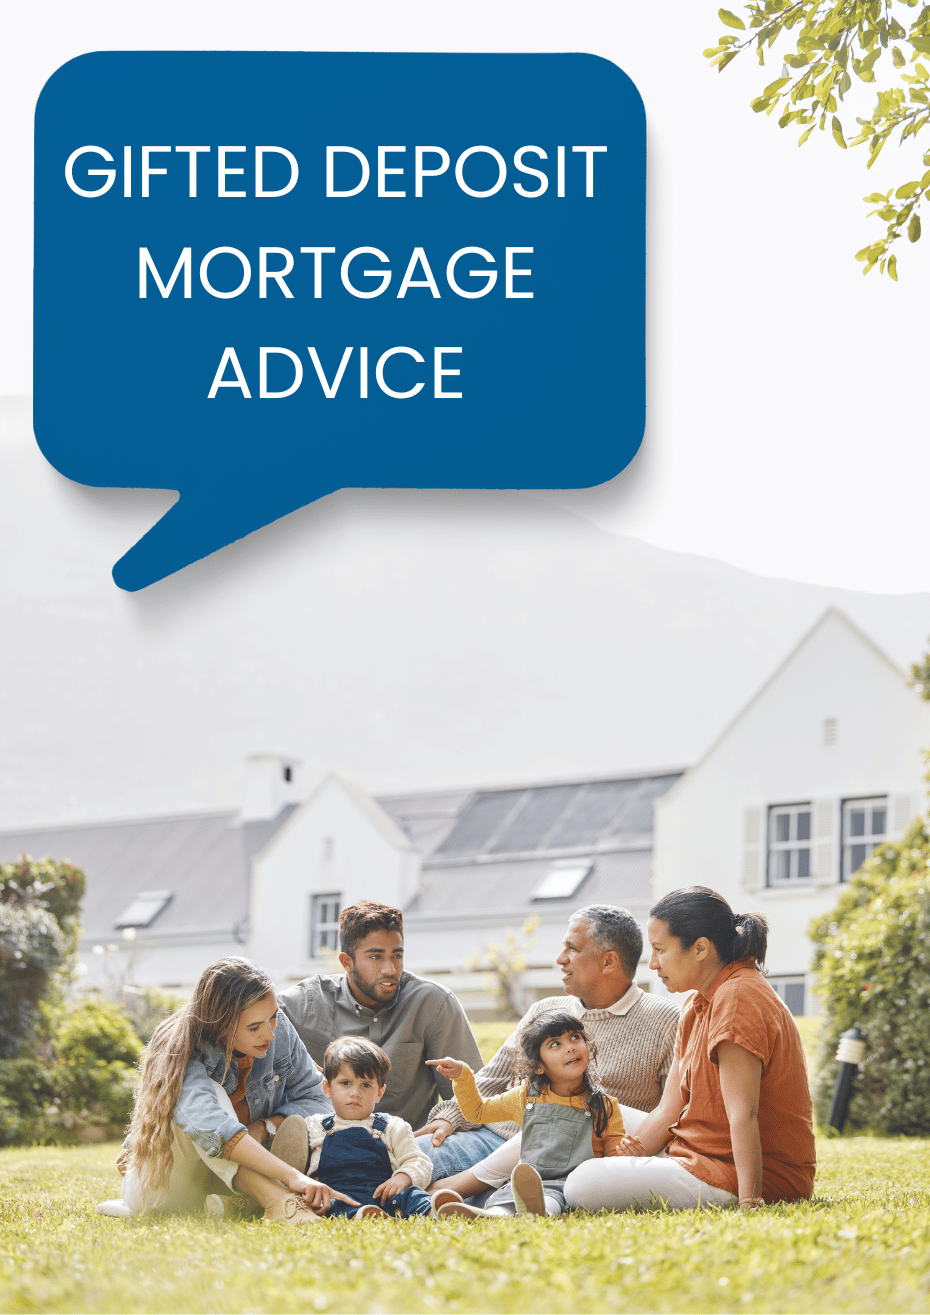 Gifted Deposit mortgage advice